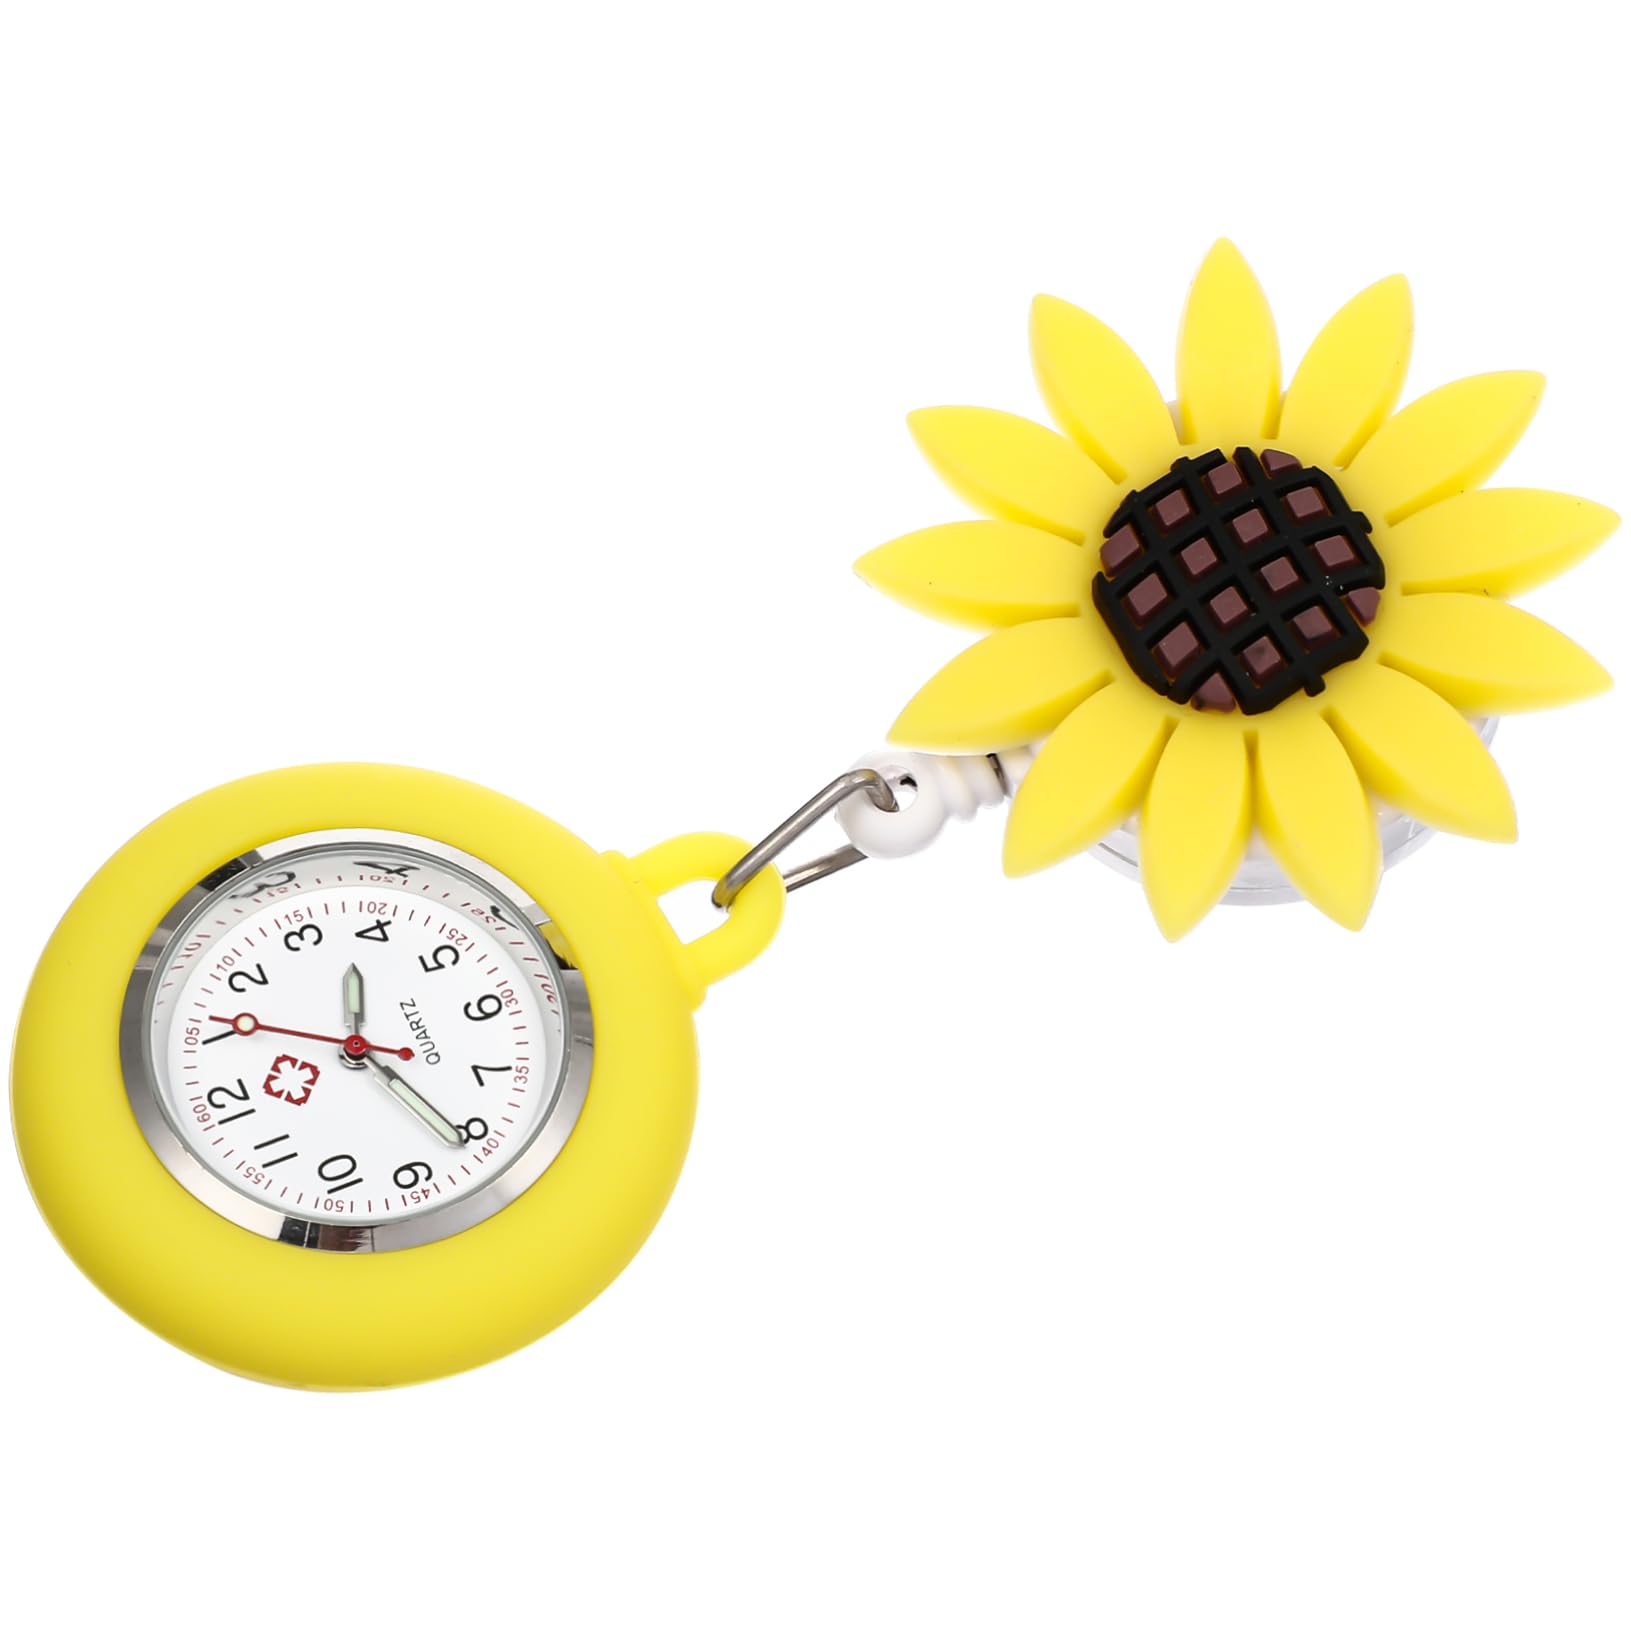 BESTOYARD 2 Pcs Sunflower Form Sunflower Watch Gifts for Men Watches for Women Watch for Nurses Watch with Silicone Cover Miss Buckle Necessity Soft Silicone